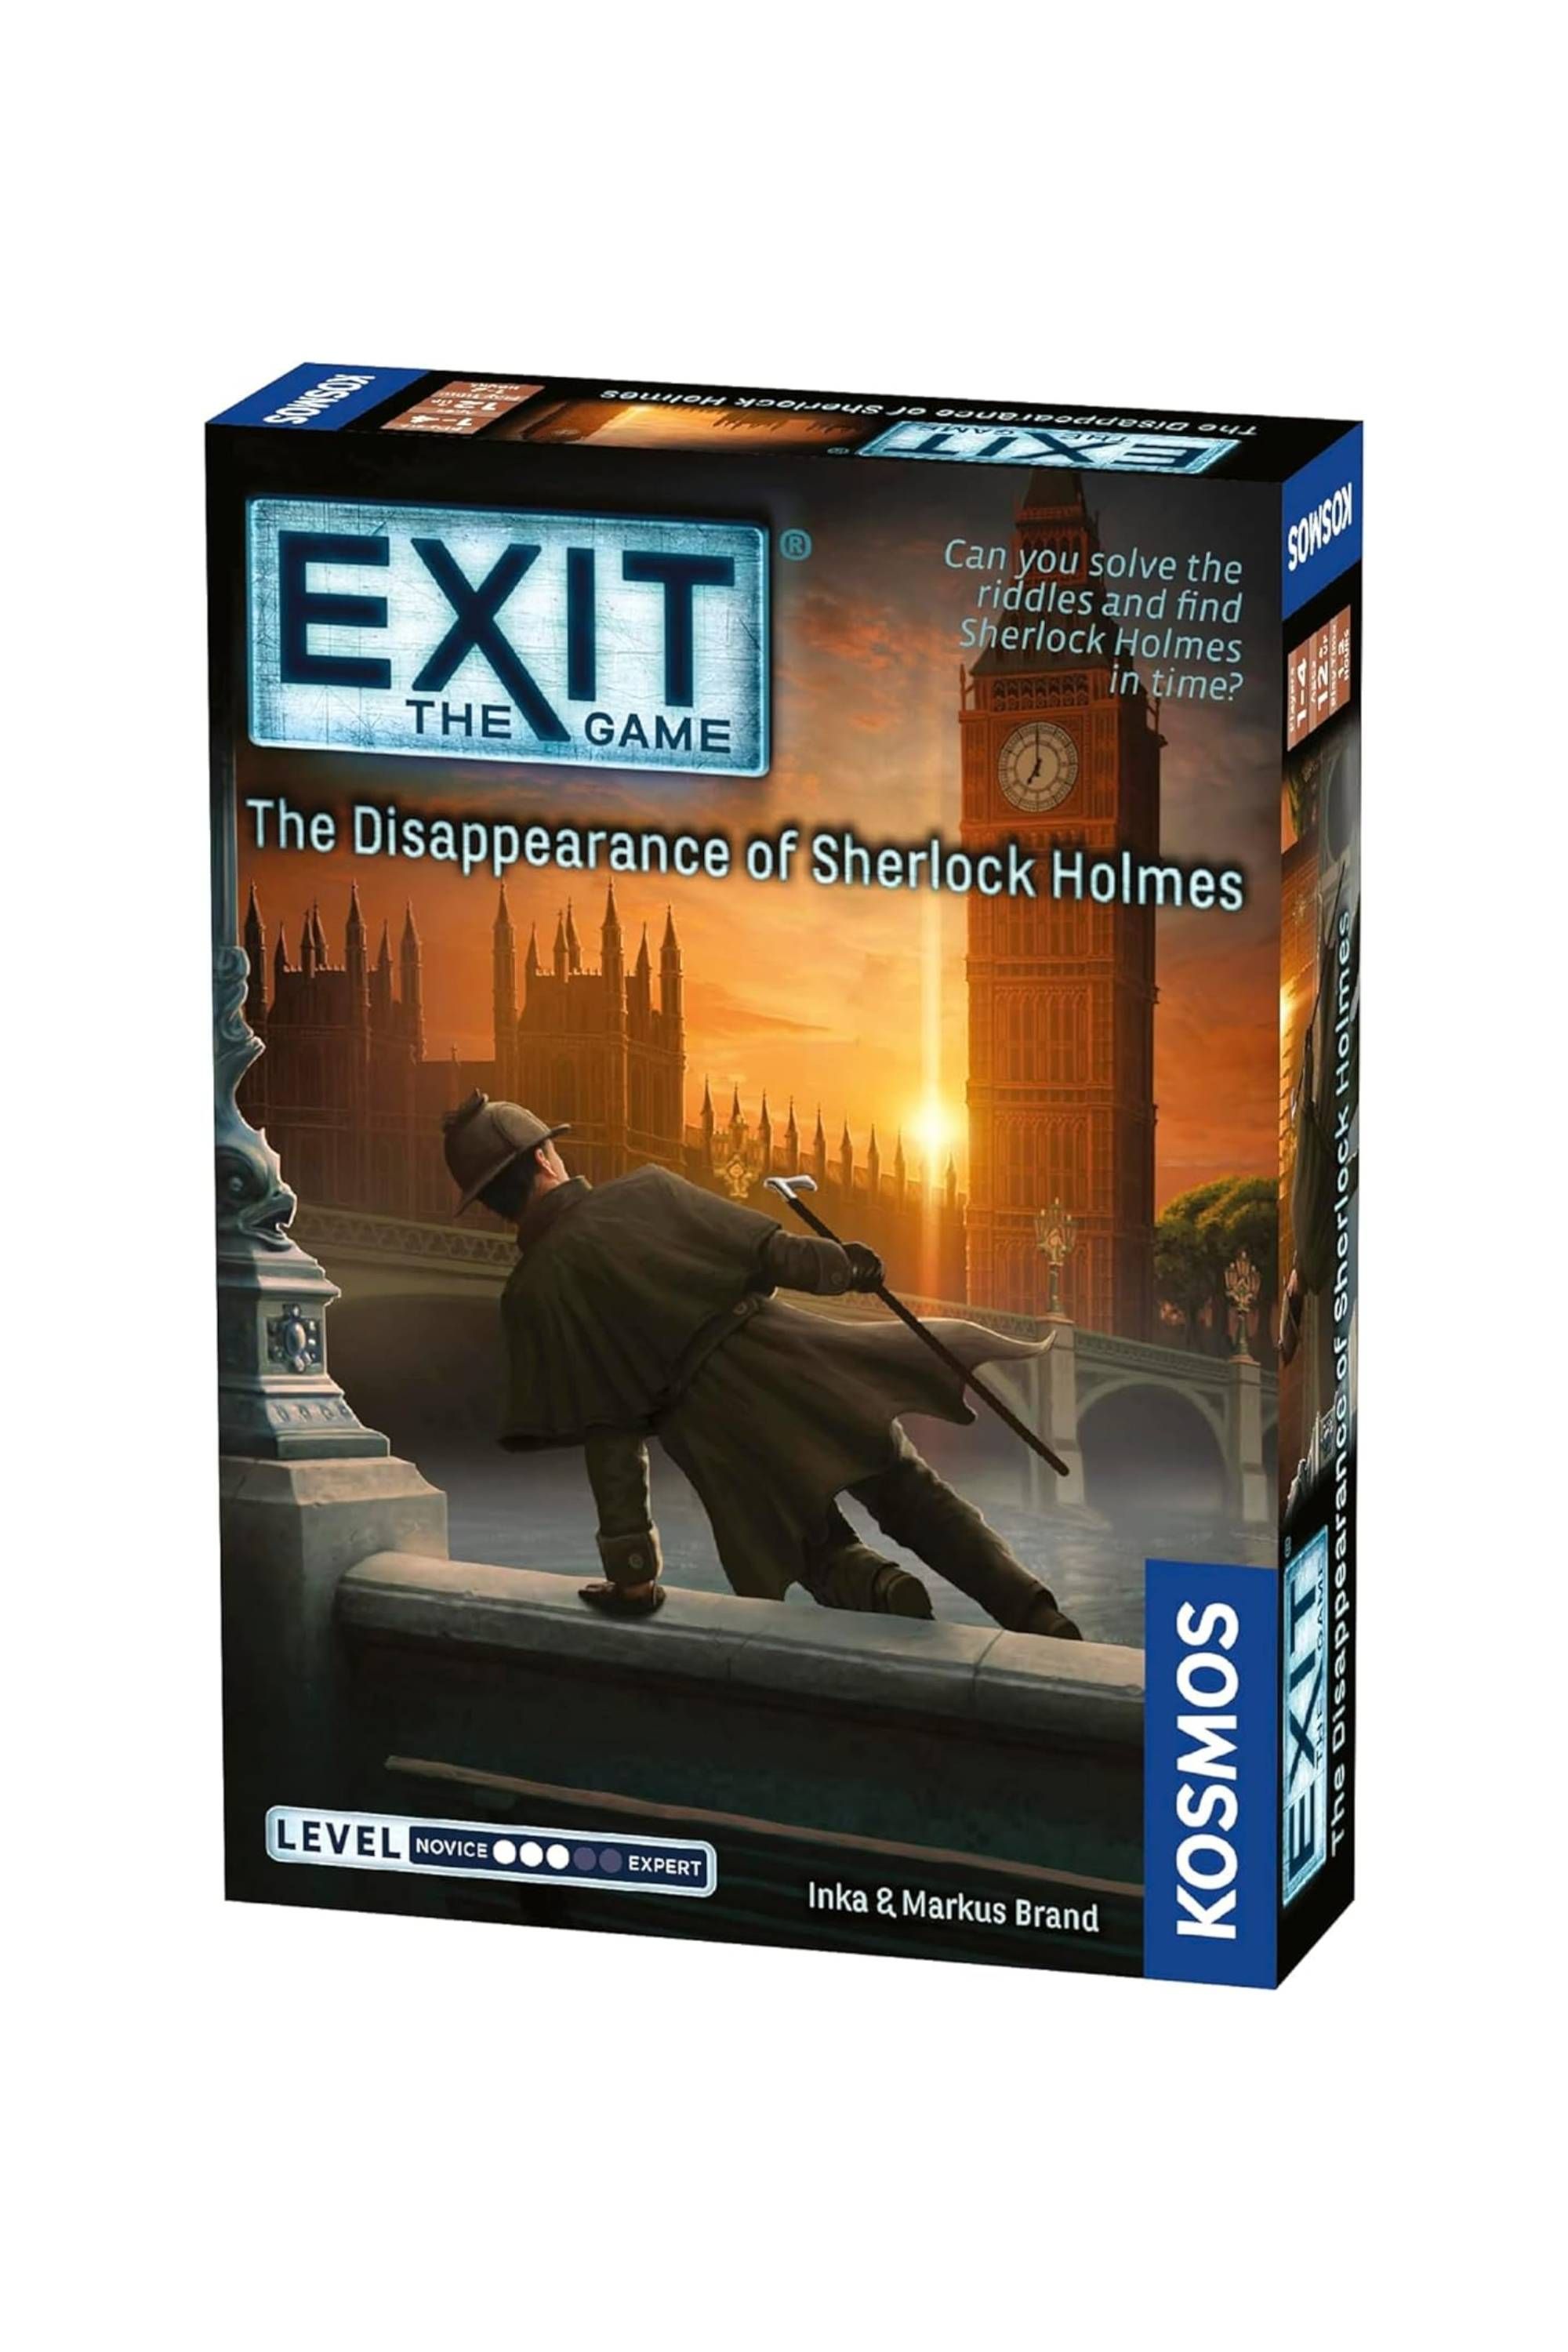 Exit - The Game - The Disappearance of Sherlock Holmes